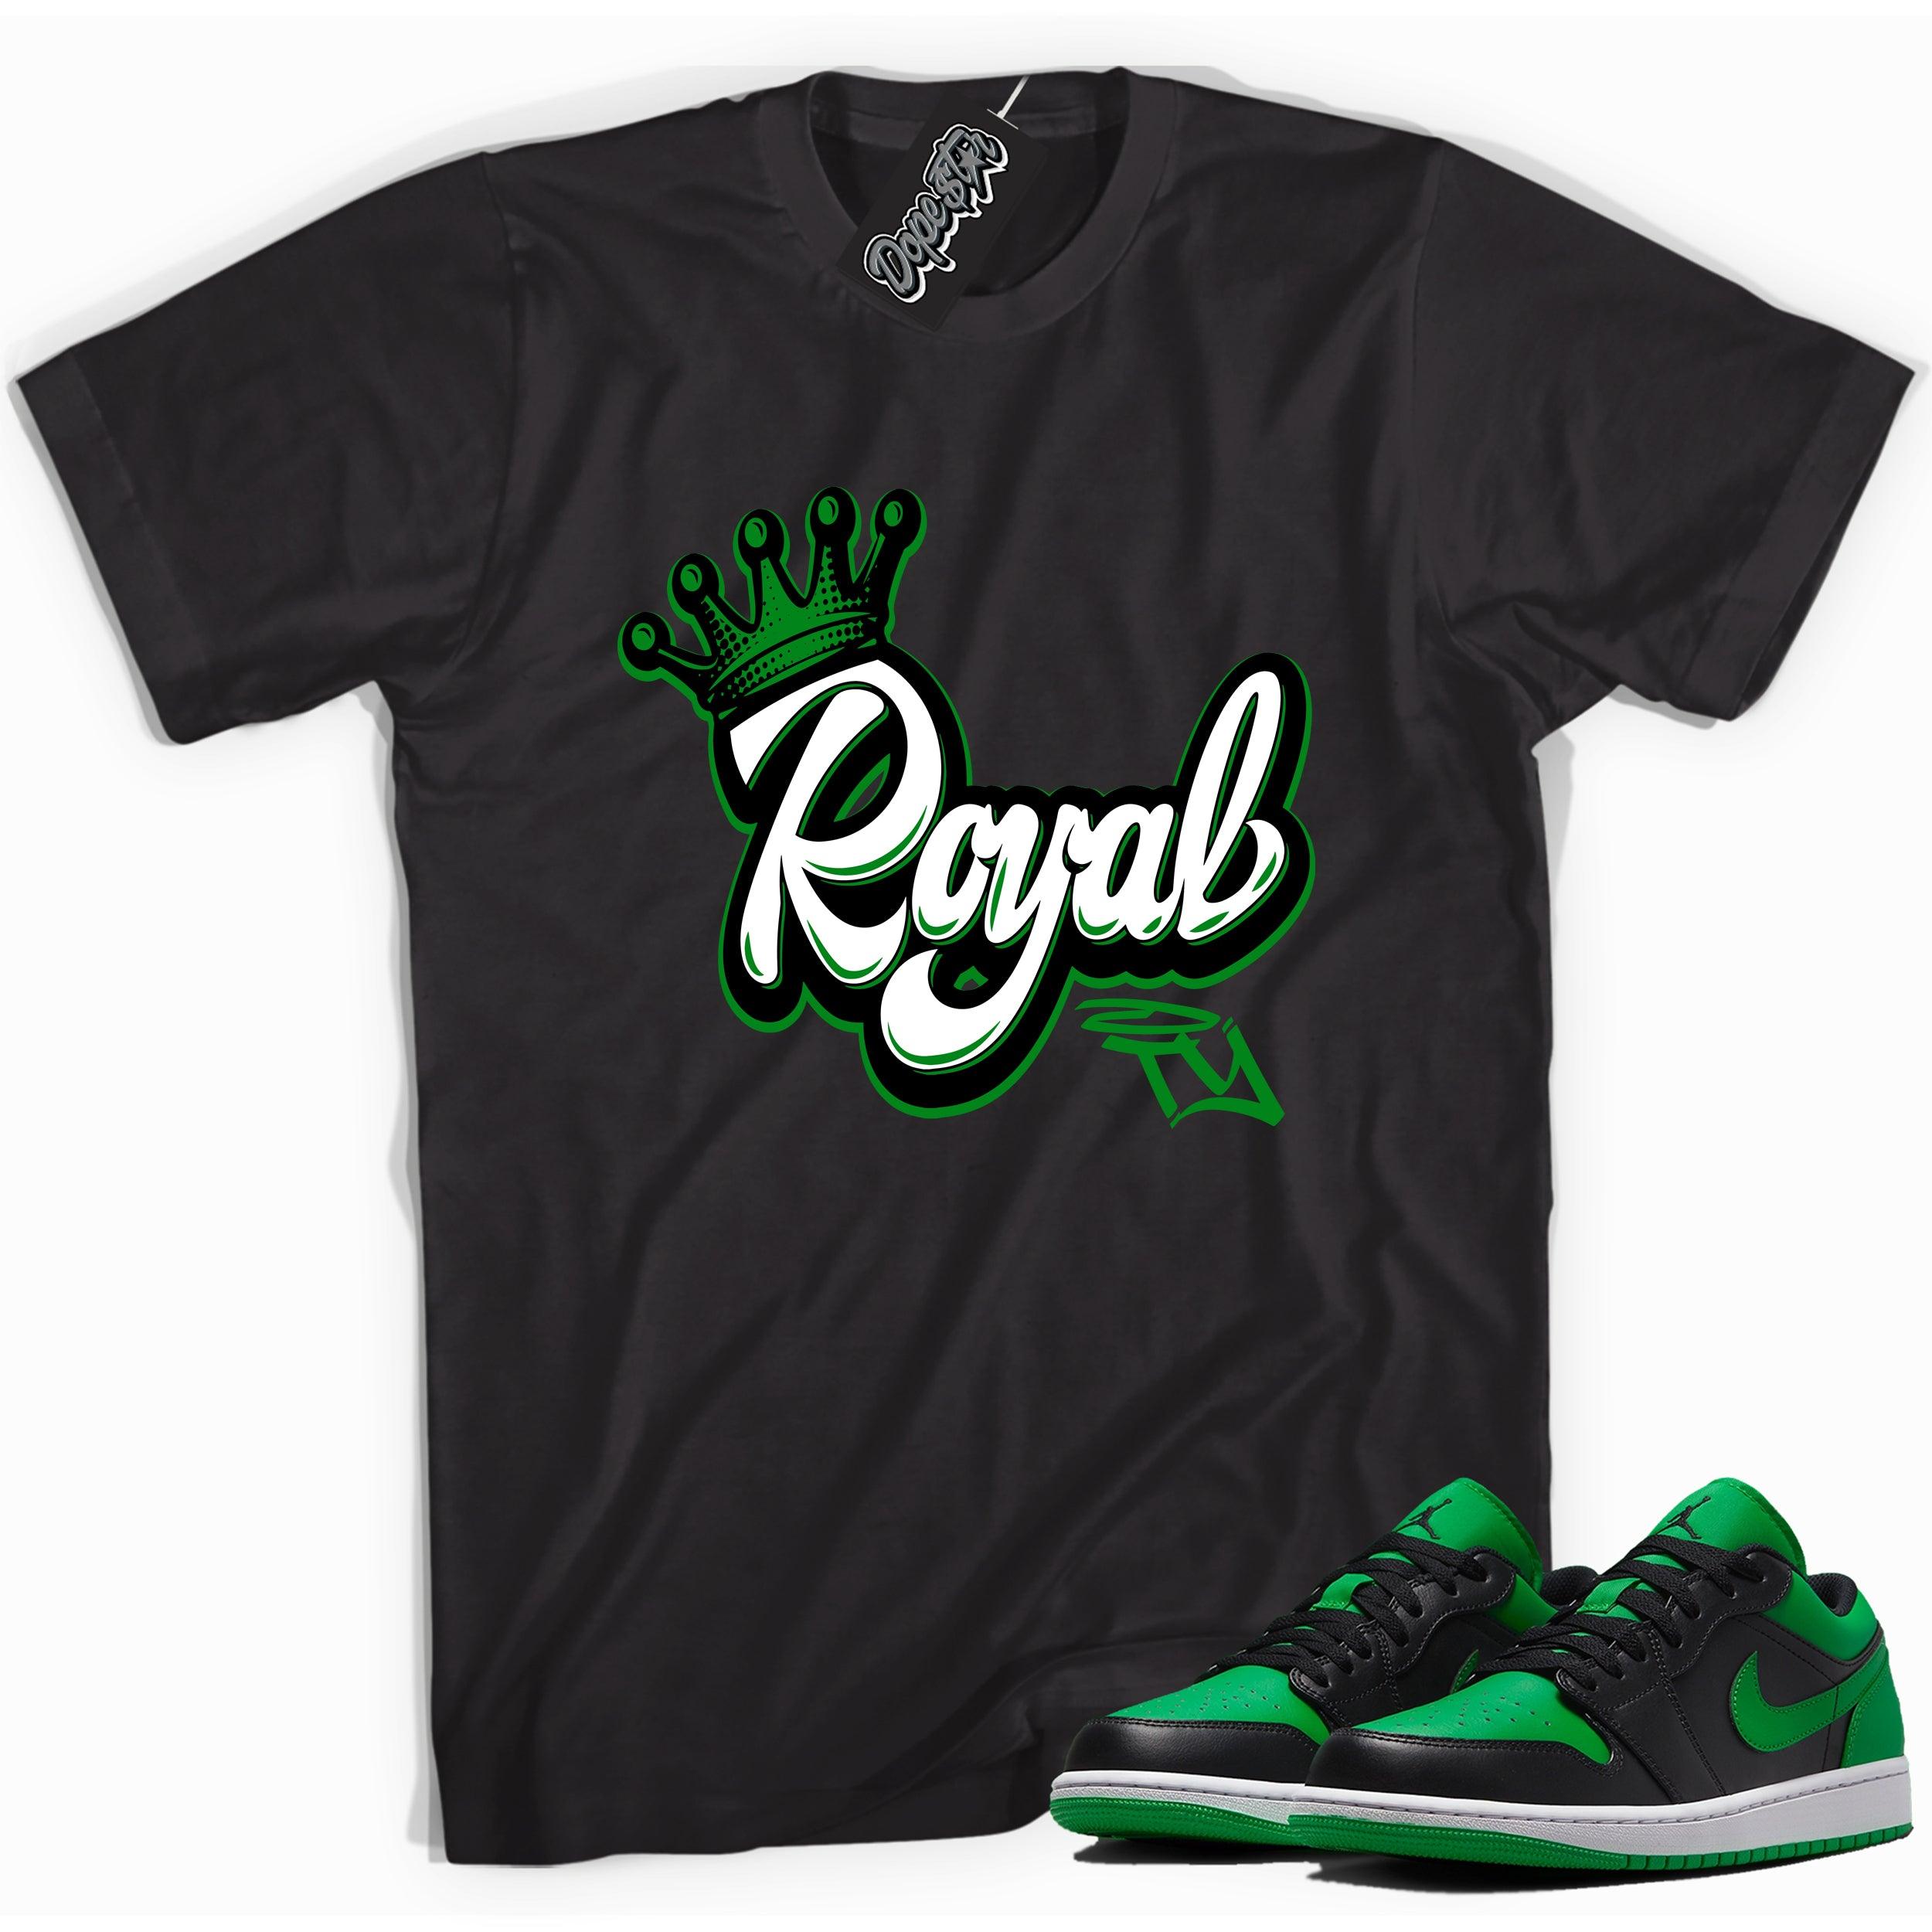 Cool black graphic tee with 'royal' print, that perfectly matches Air Jordan 1 Low Lucky Green sneakers